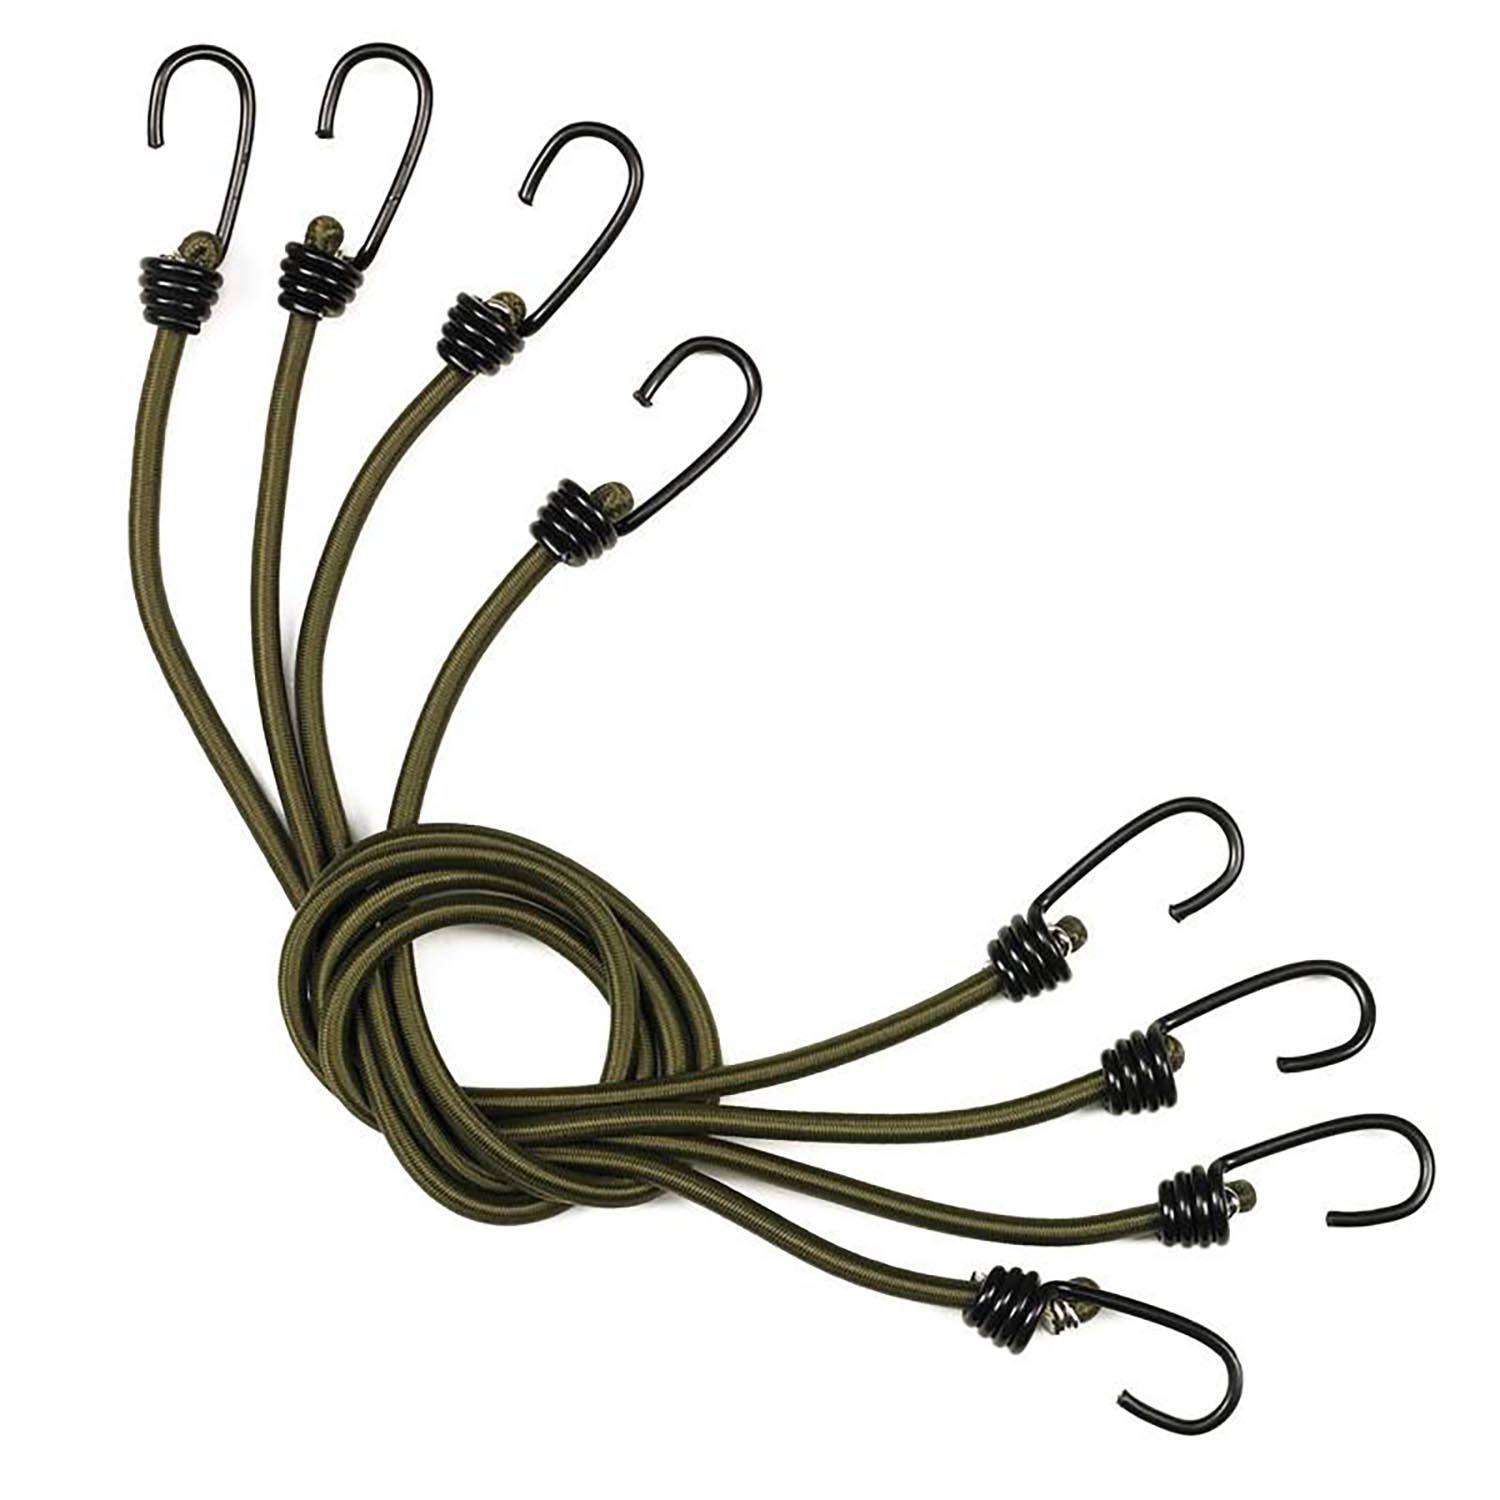 PROFORCE EQUIPMENT HEAVY DUTY BUNGEE CORDS 4 PACK